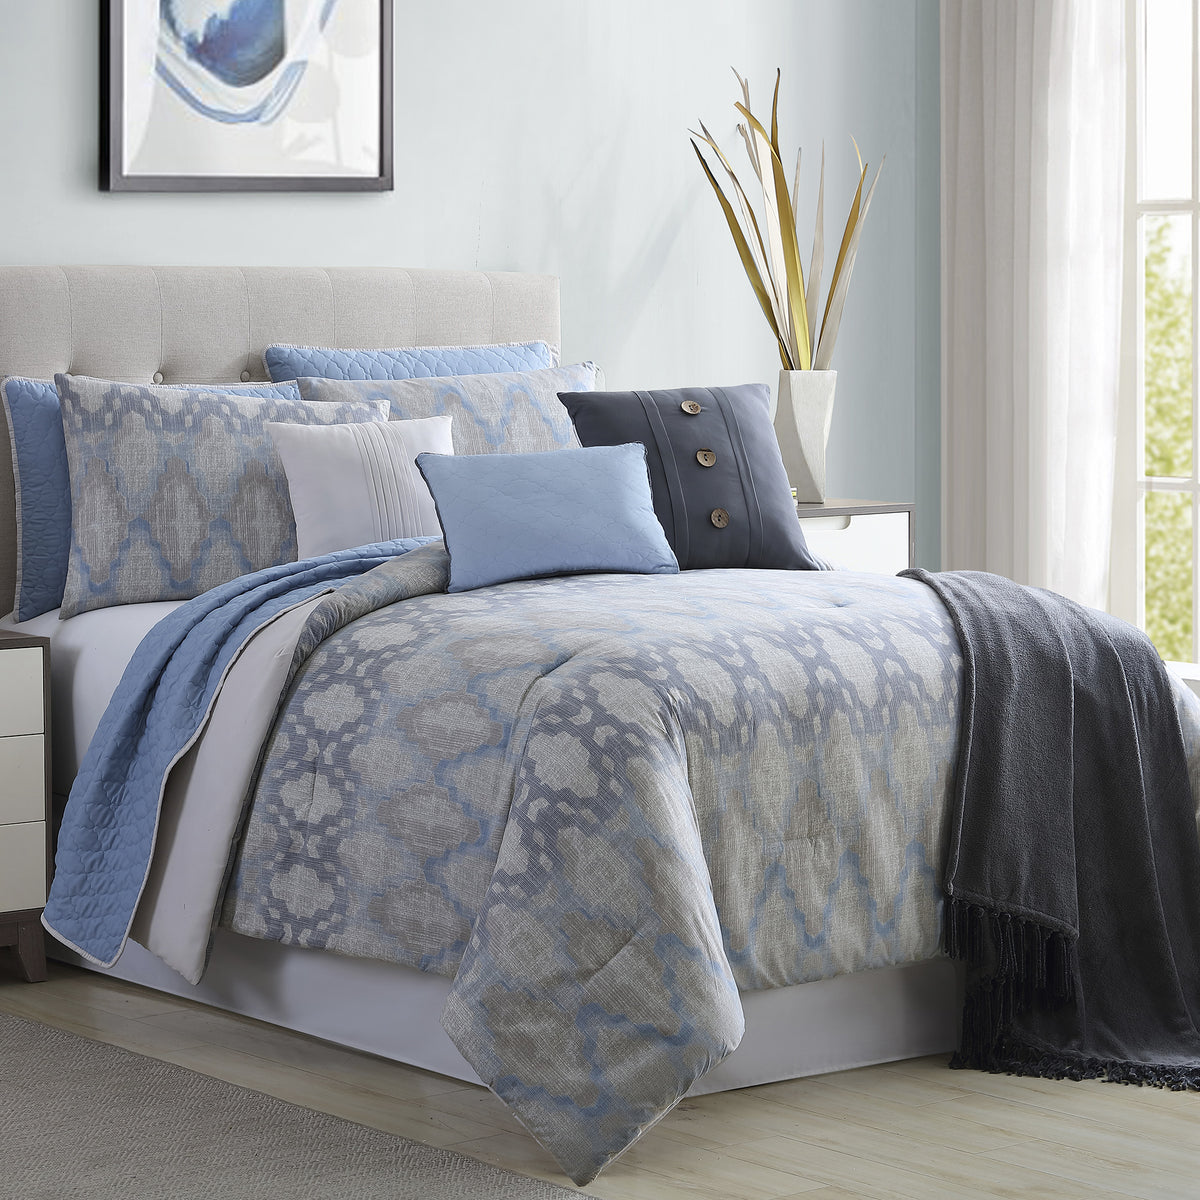 Andria 10 Piece King Size Comforter and Coverlet Set , Blue and Gray - BM202800